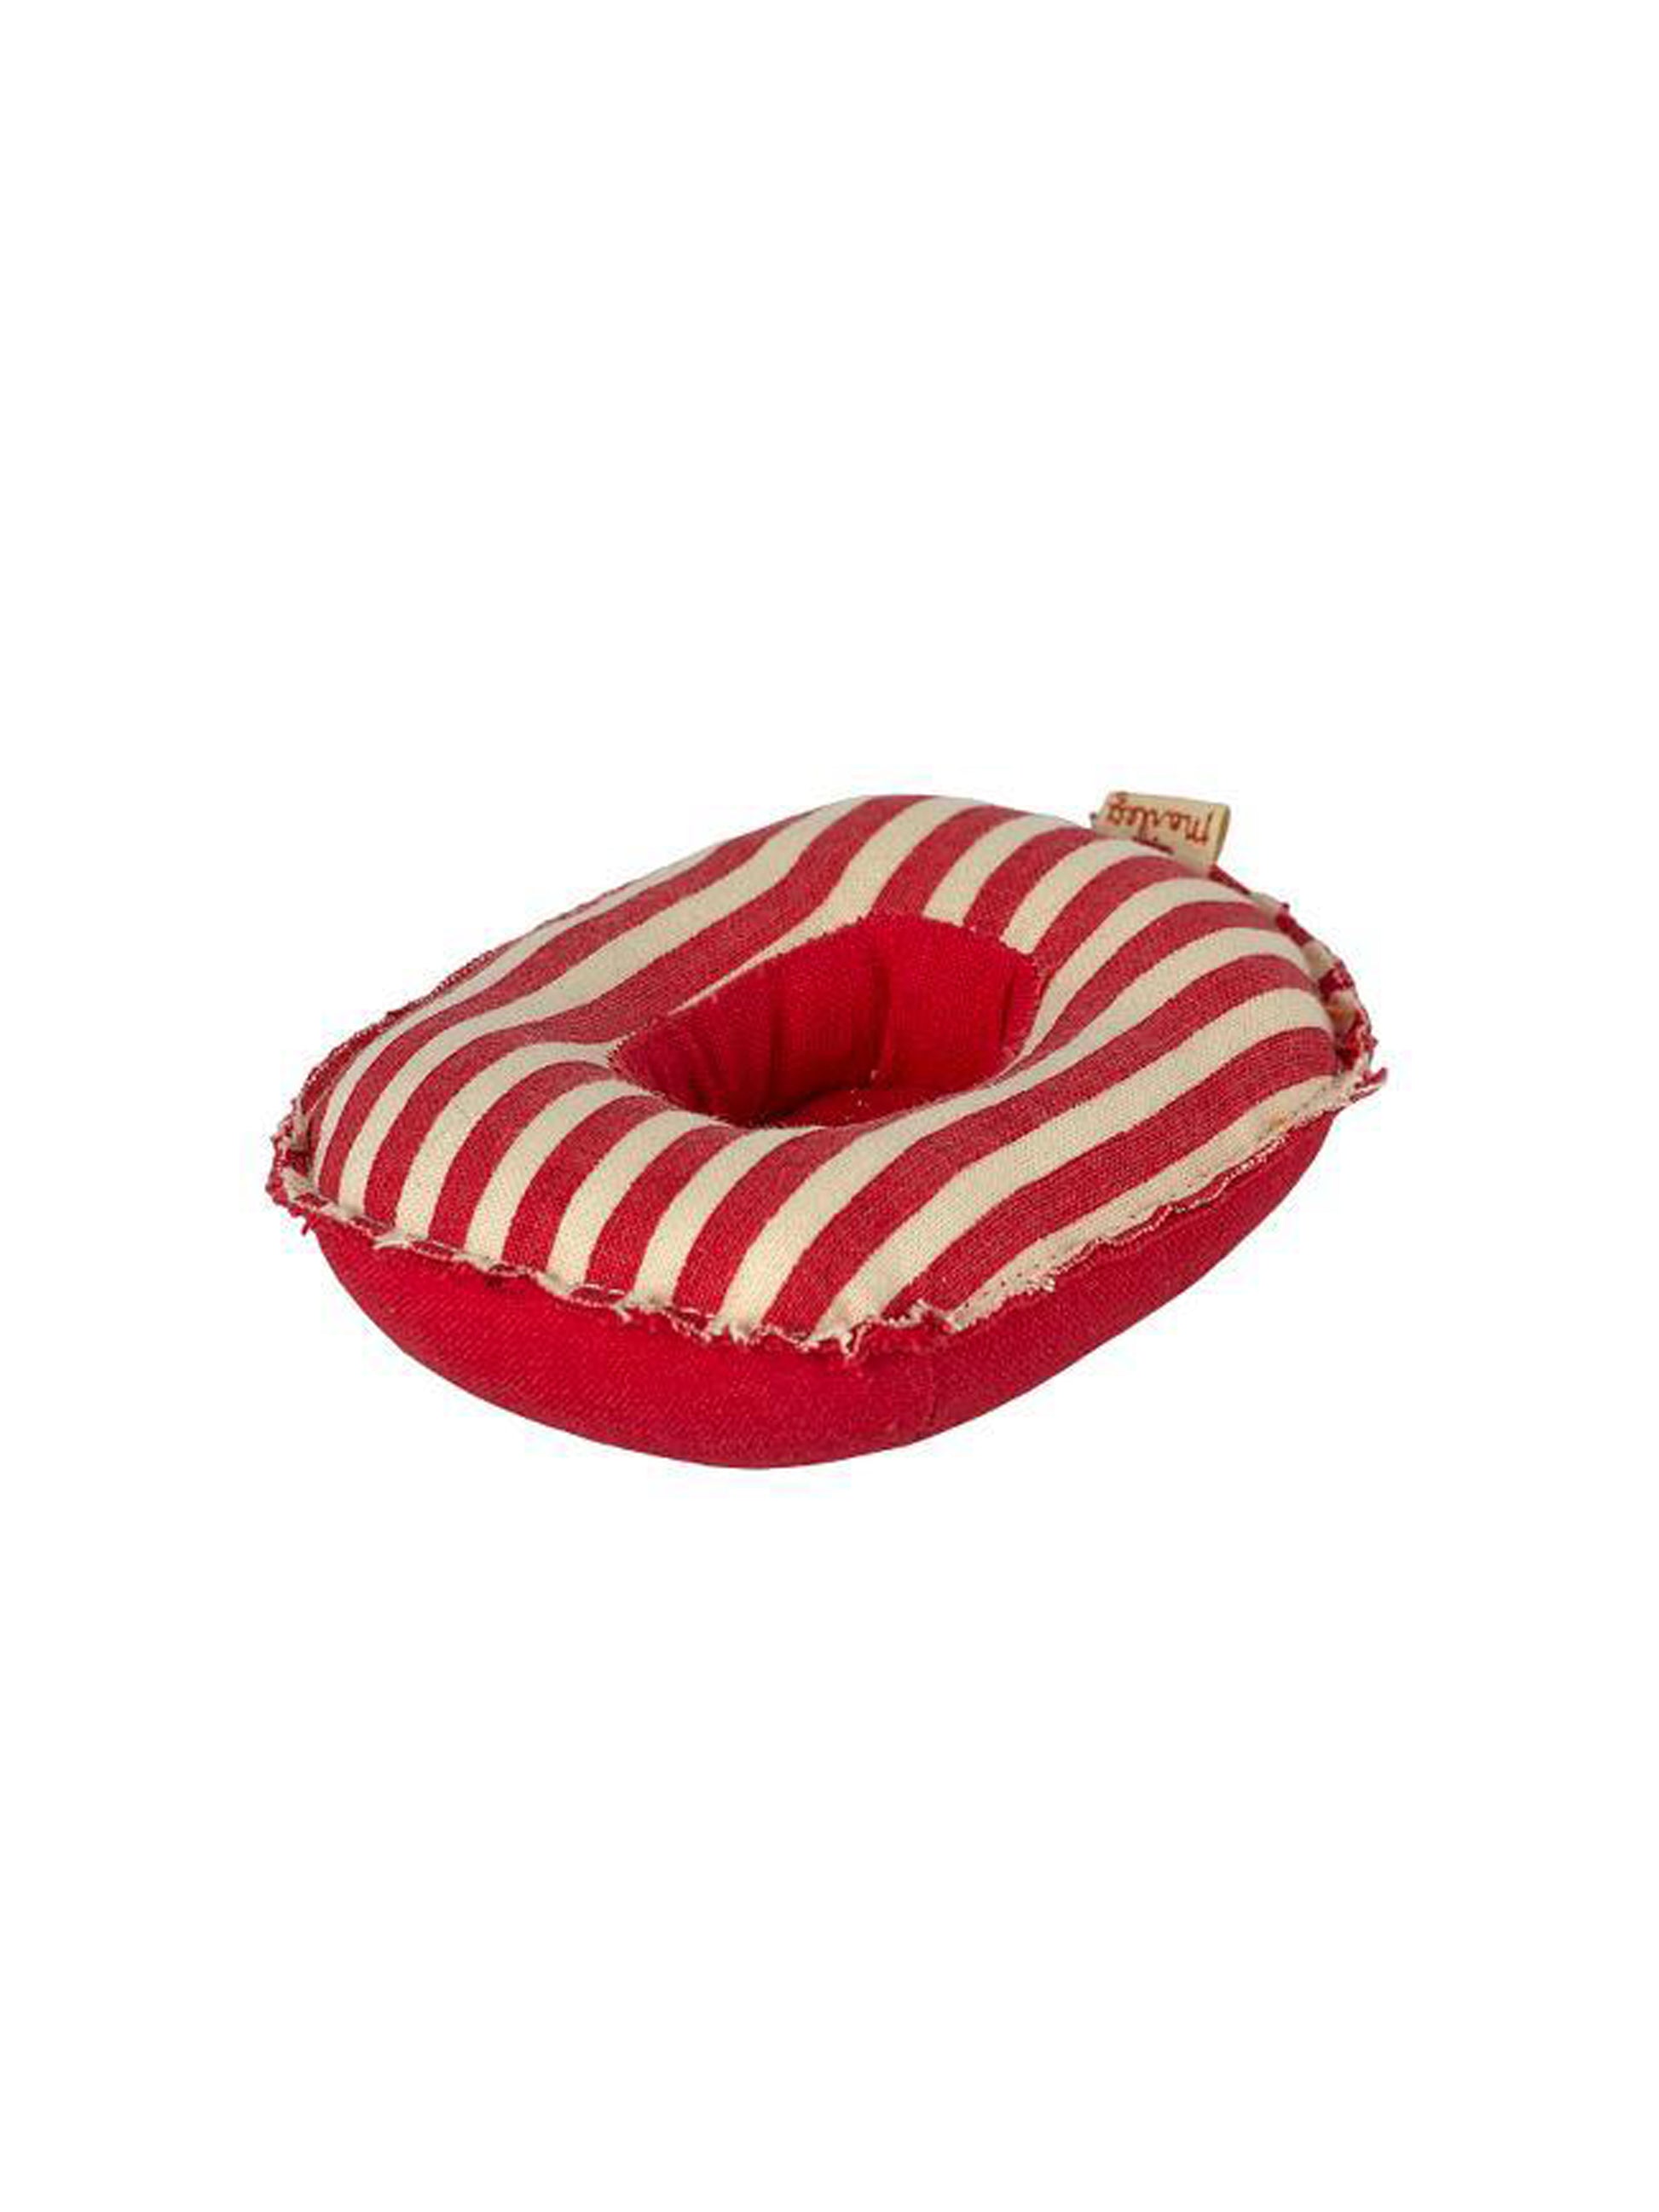 Maileg Rubber Boat for Small Mouse Red Stripe Weston Table